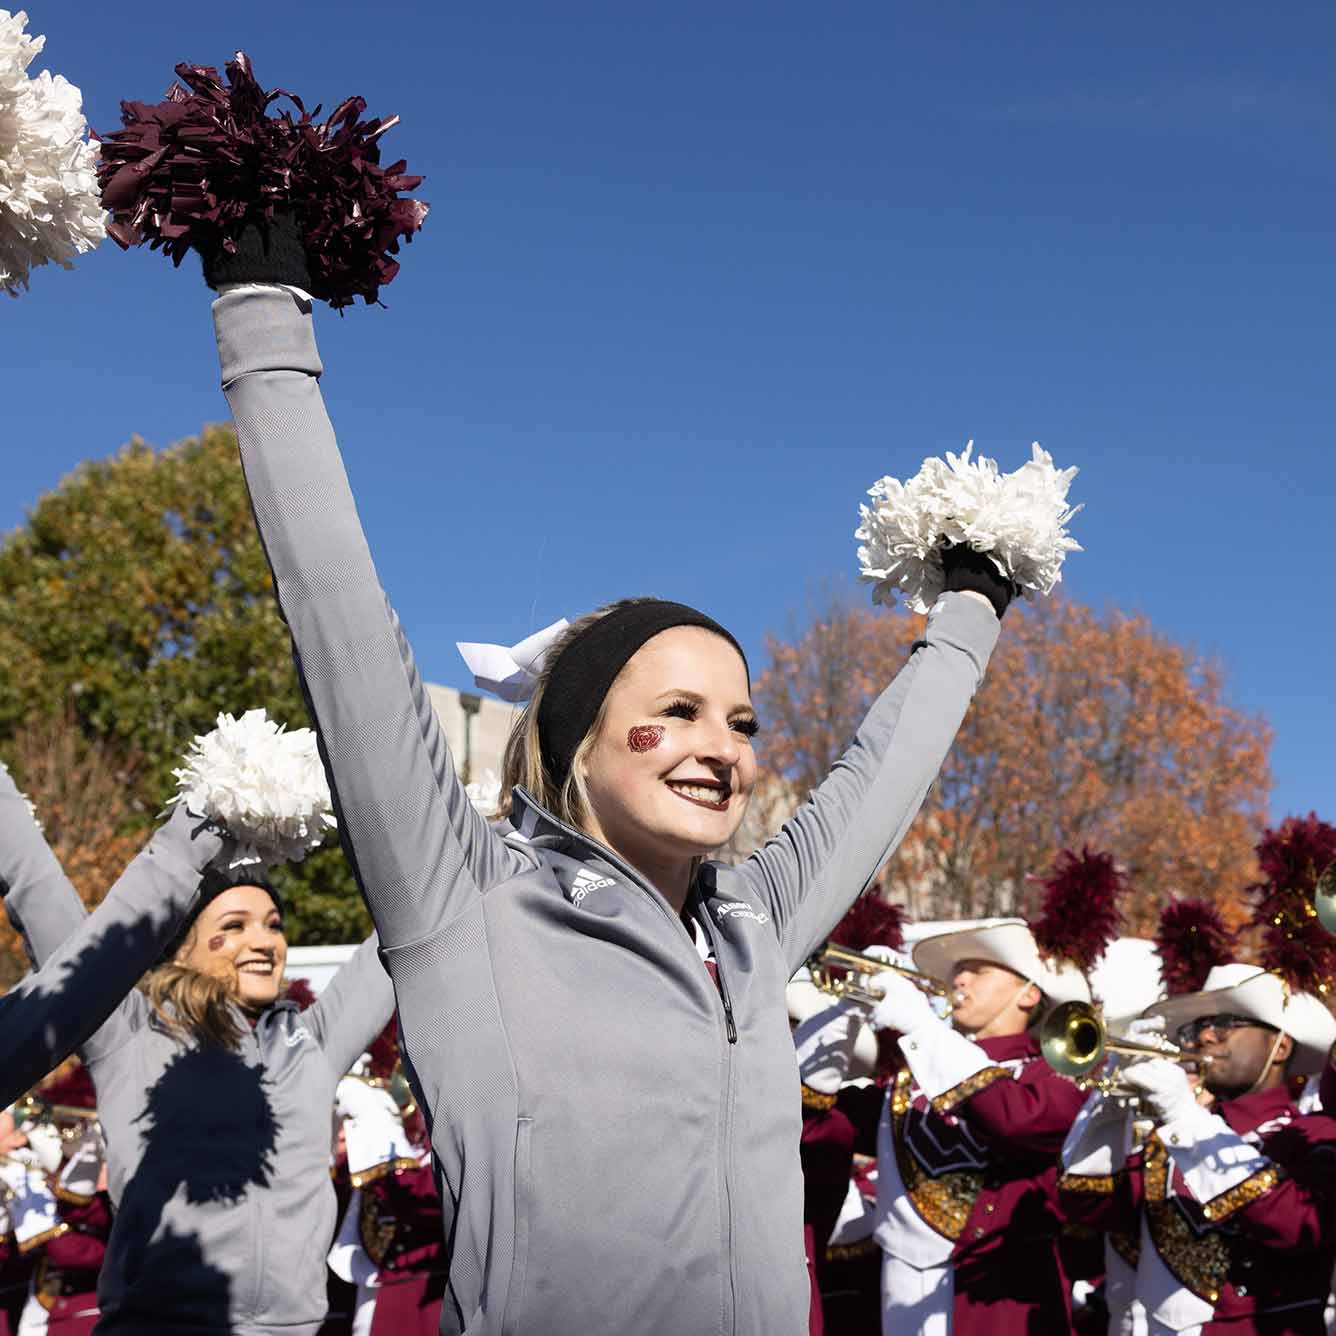 Missouri State cheerleaders and band performing at a homecoming ceremony.